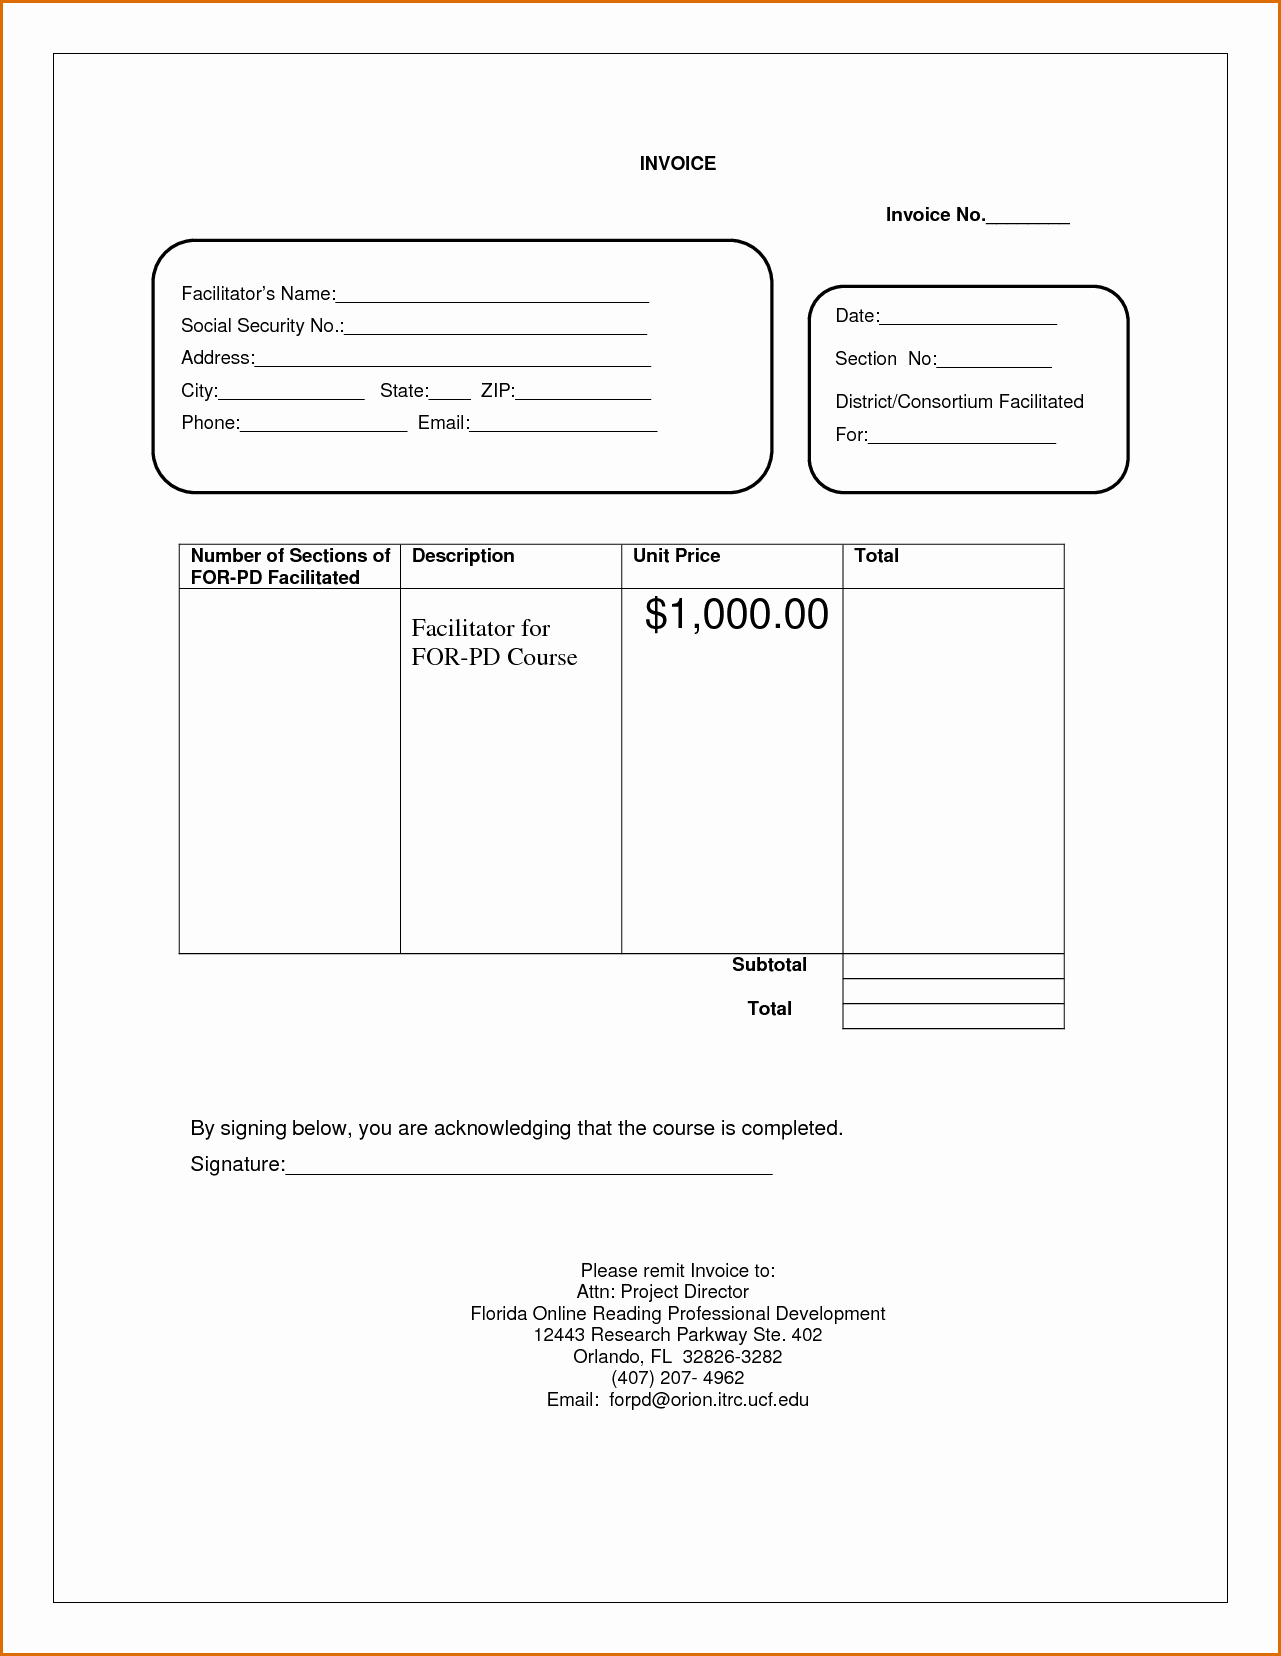 Blank Invoice Template Free New 8 Blank Invoice Template Pdf